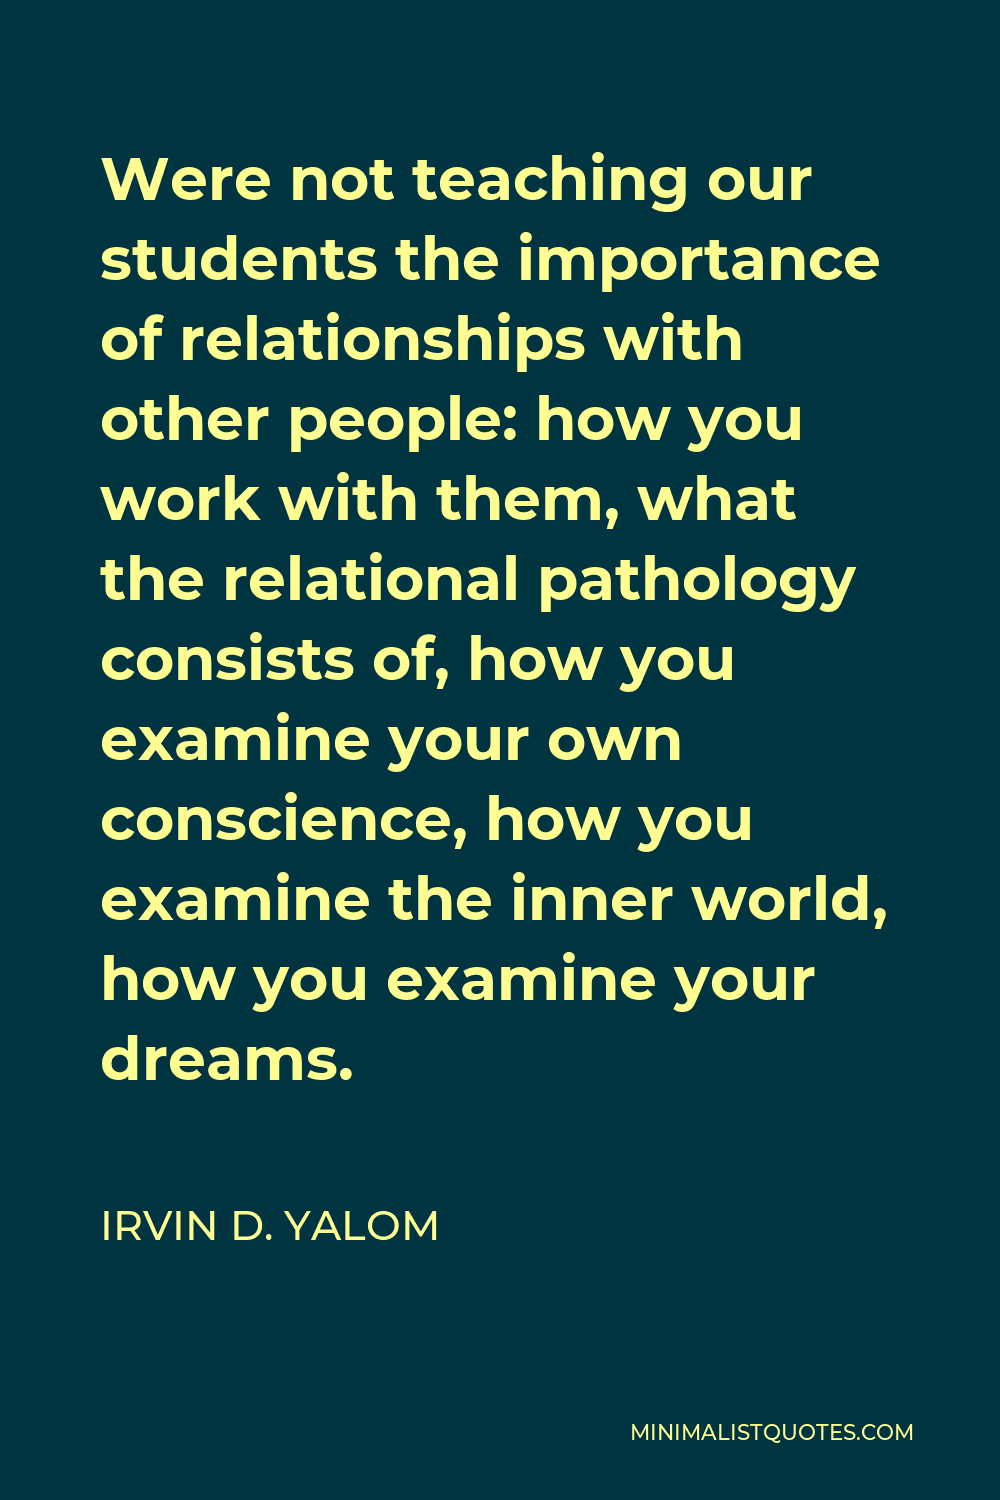 Irvin D. Yalom Quote - Were not teaching our students the importance of relationships with other people: how you work with them, what the relational pathology consists of, how you examine your own conscience, how you examine the inner world, how you examine your dreams.